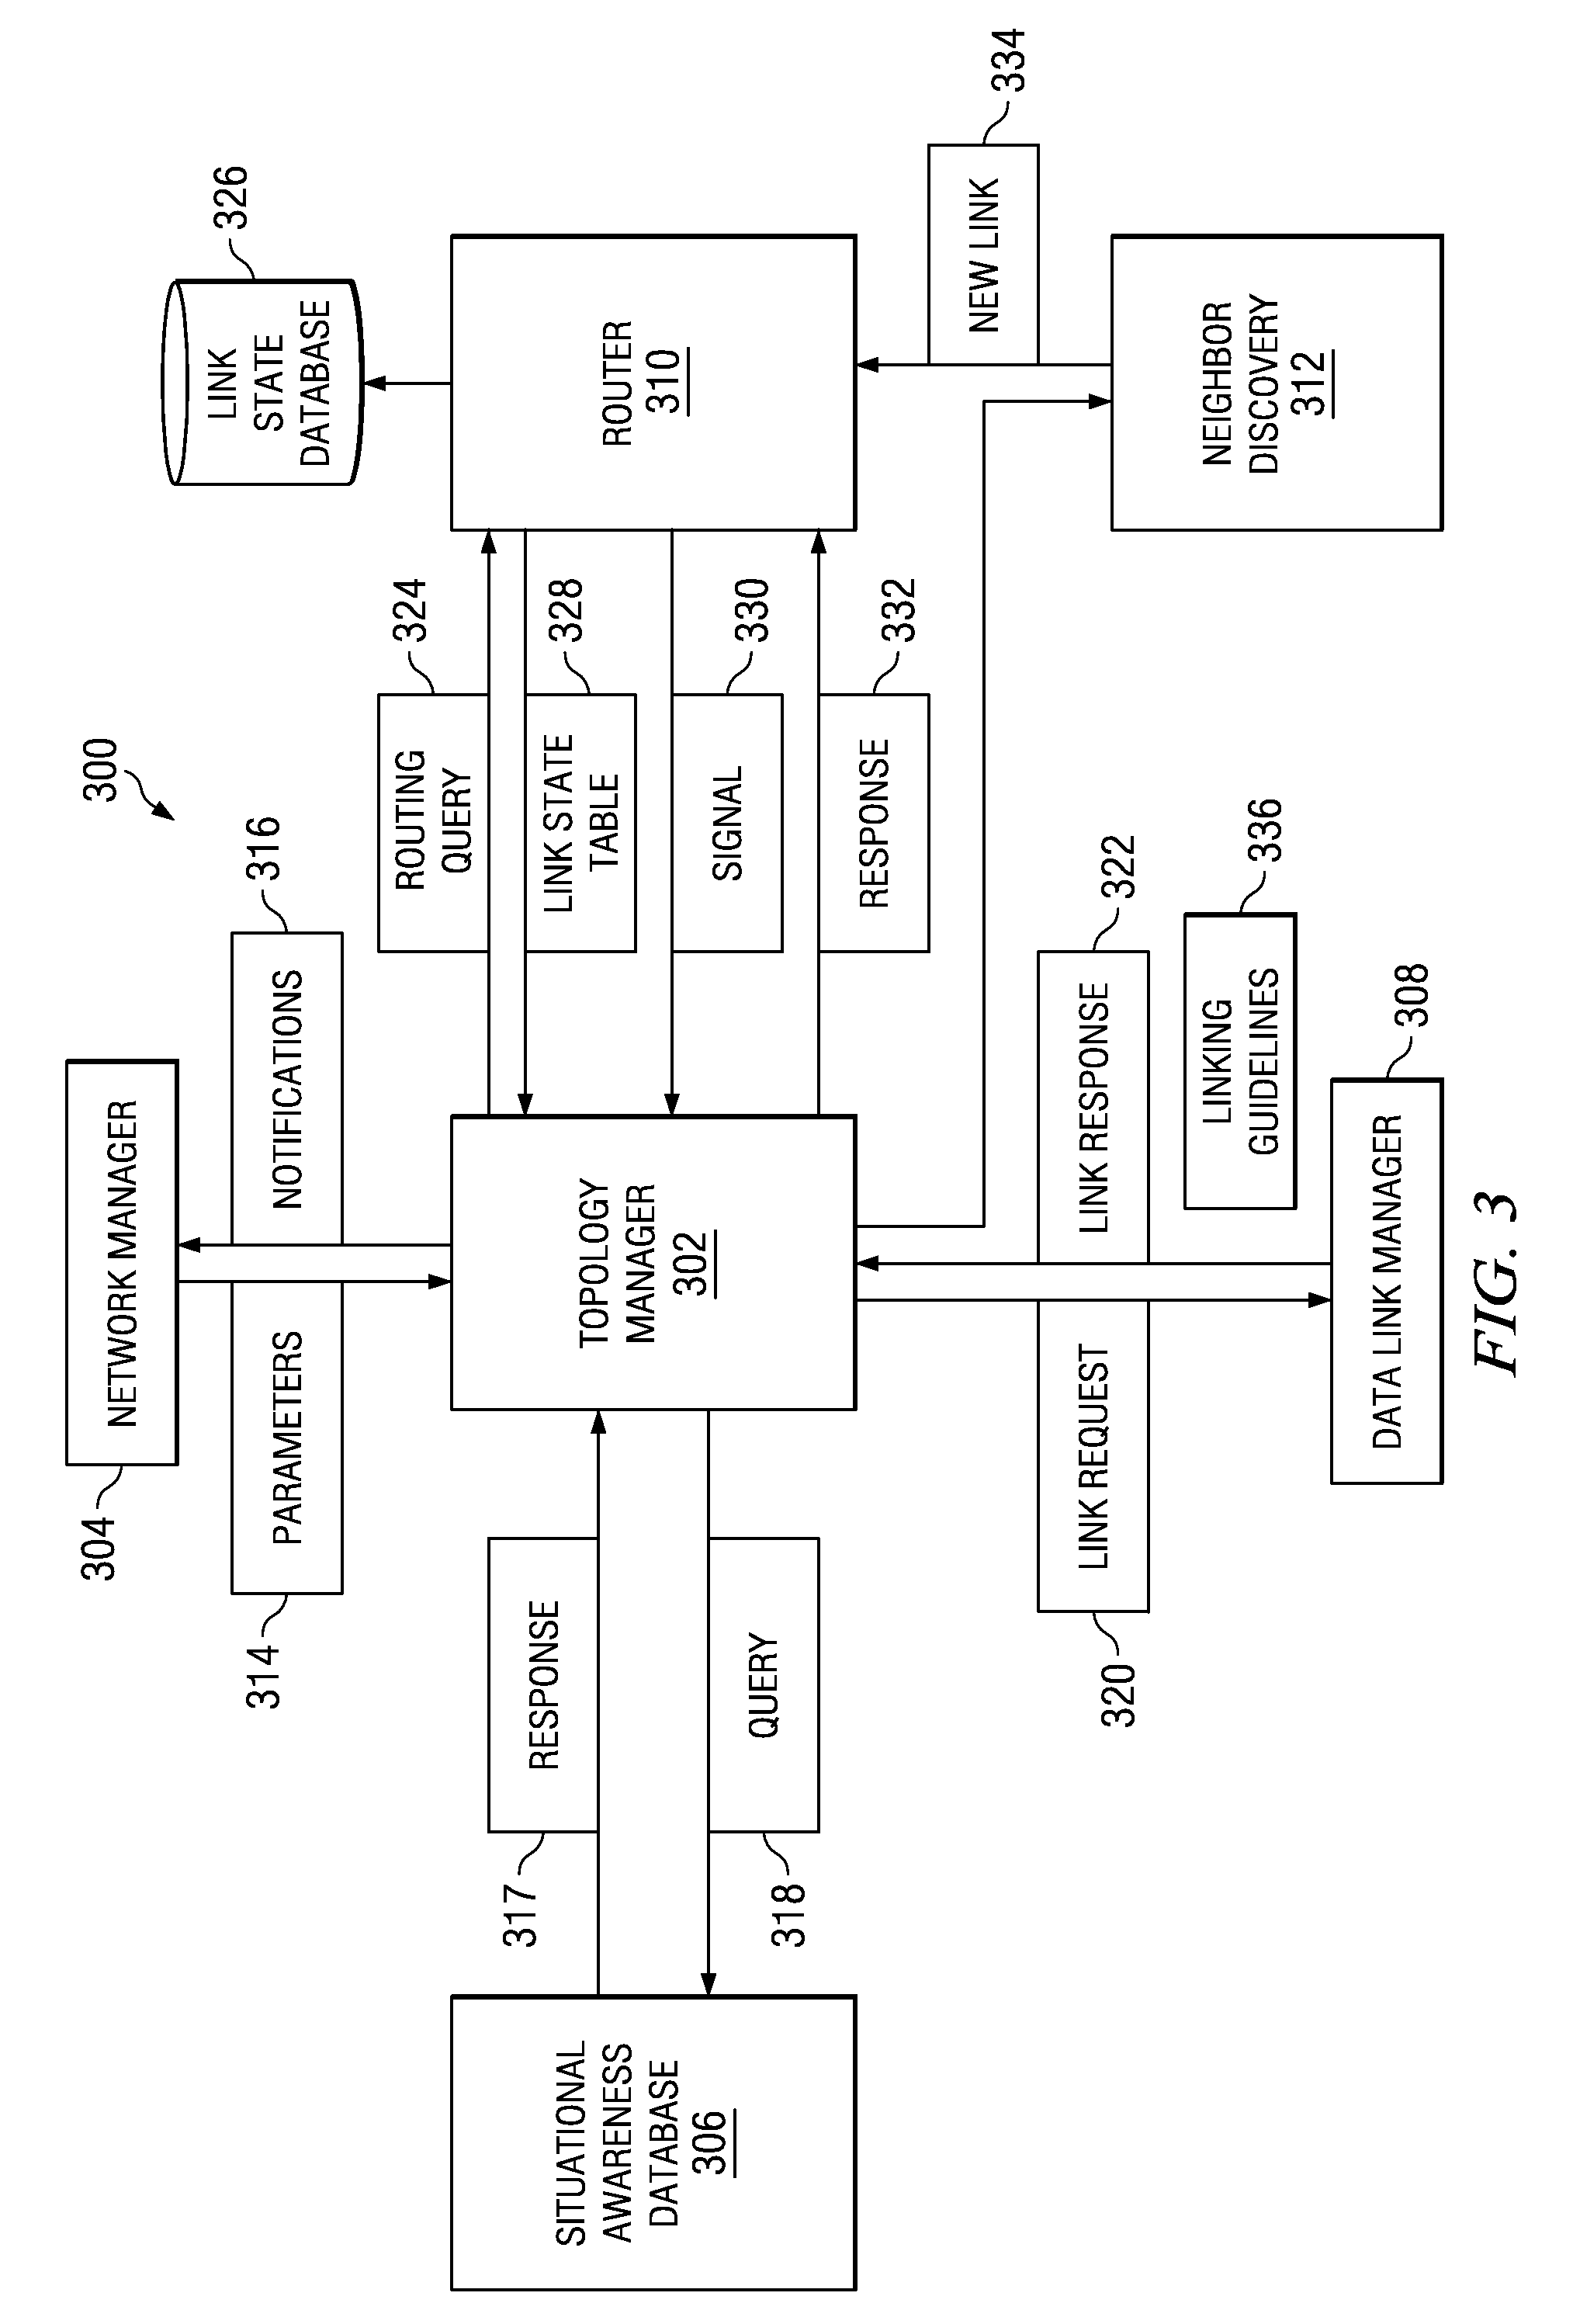 Method and apparatus for directional networking topology management